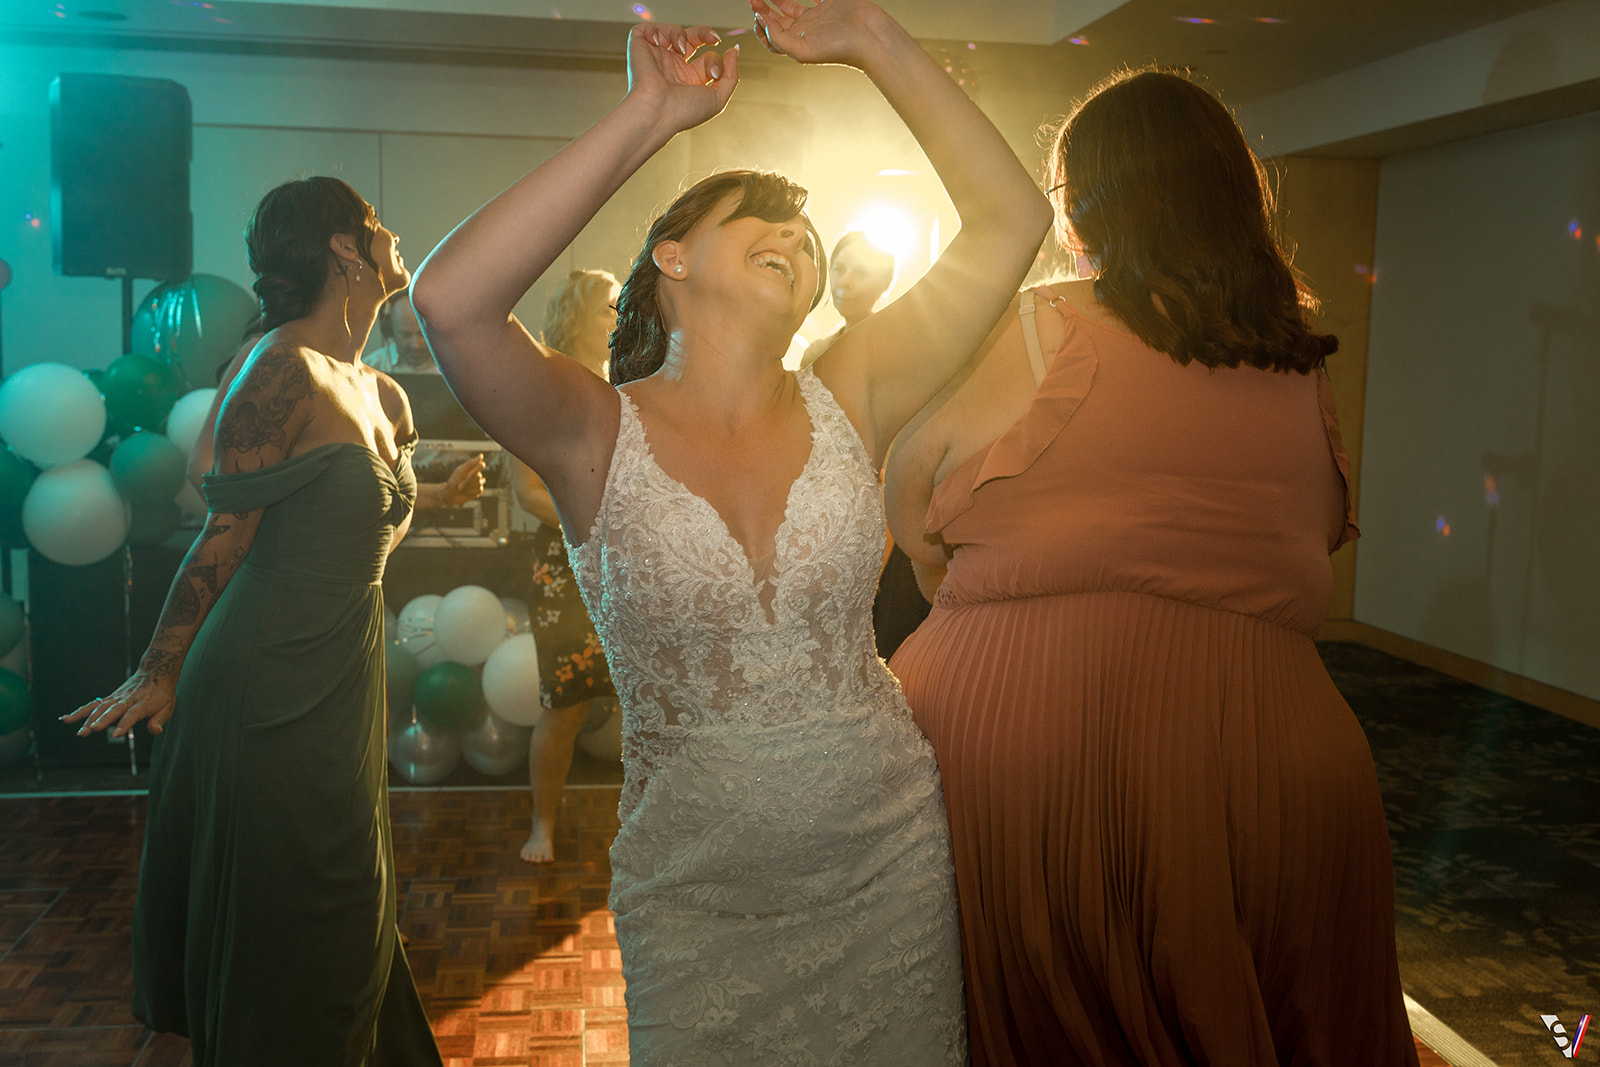 Beyond the Posed Shots: Candid moments to capture at evening weddings.